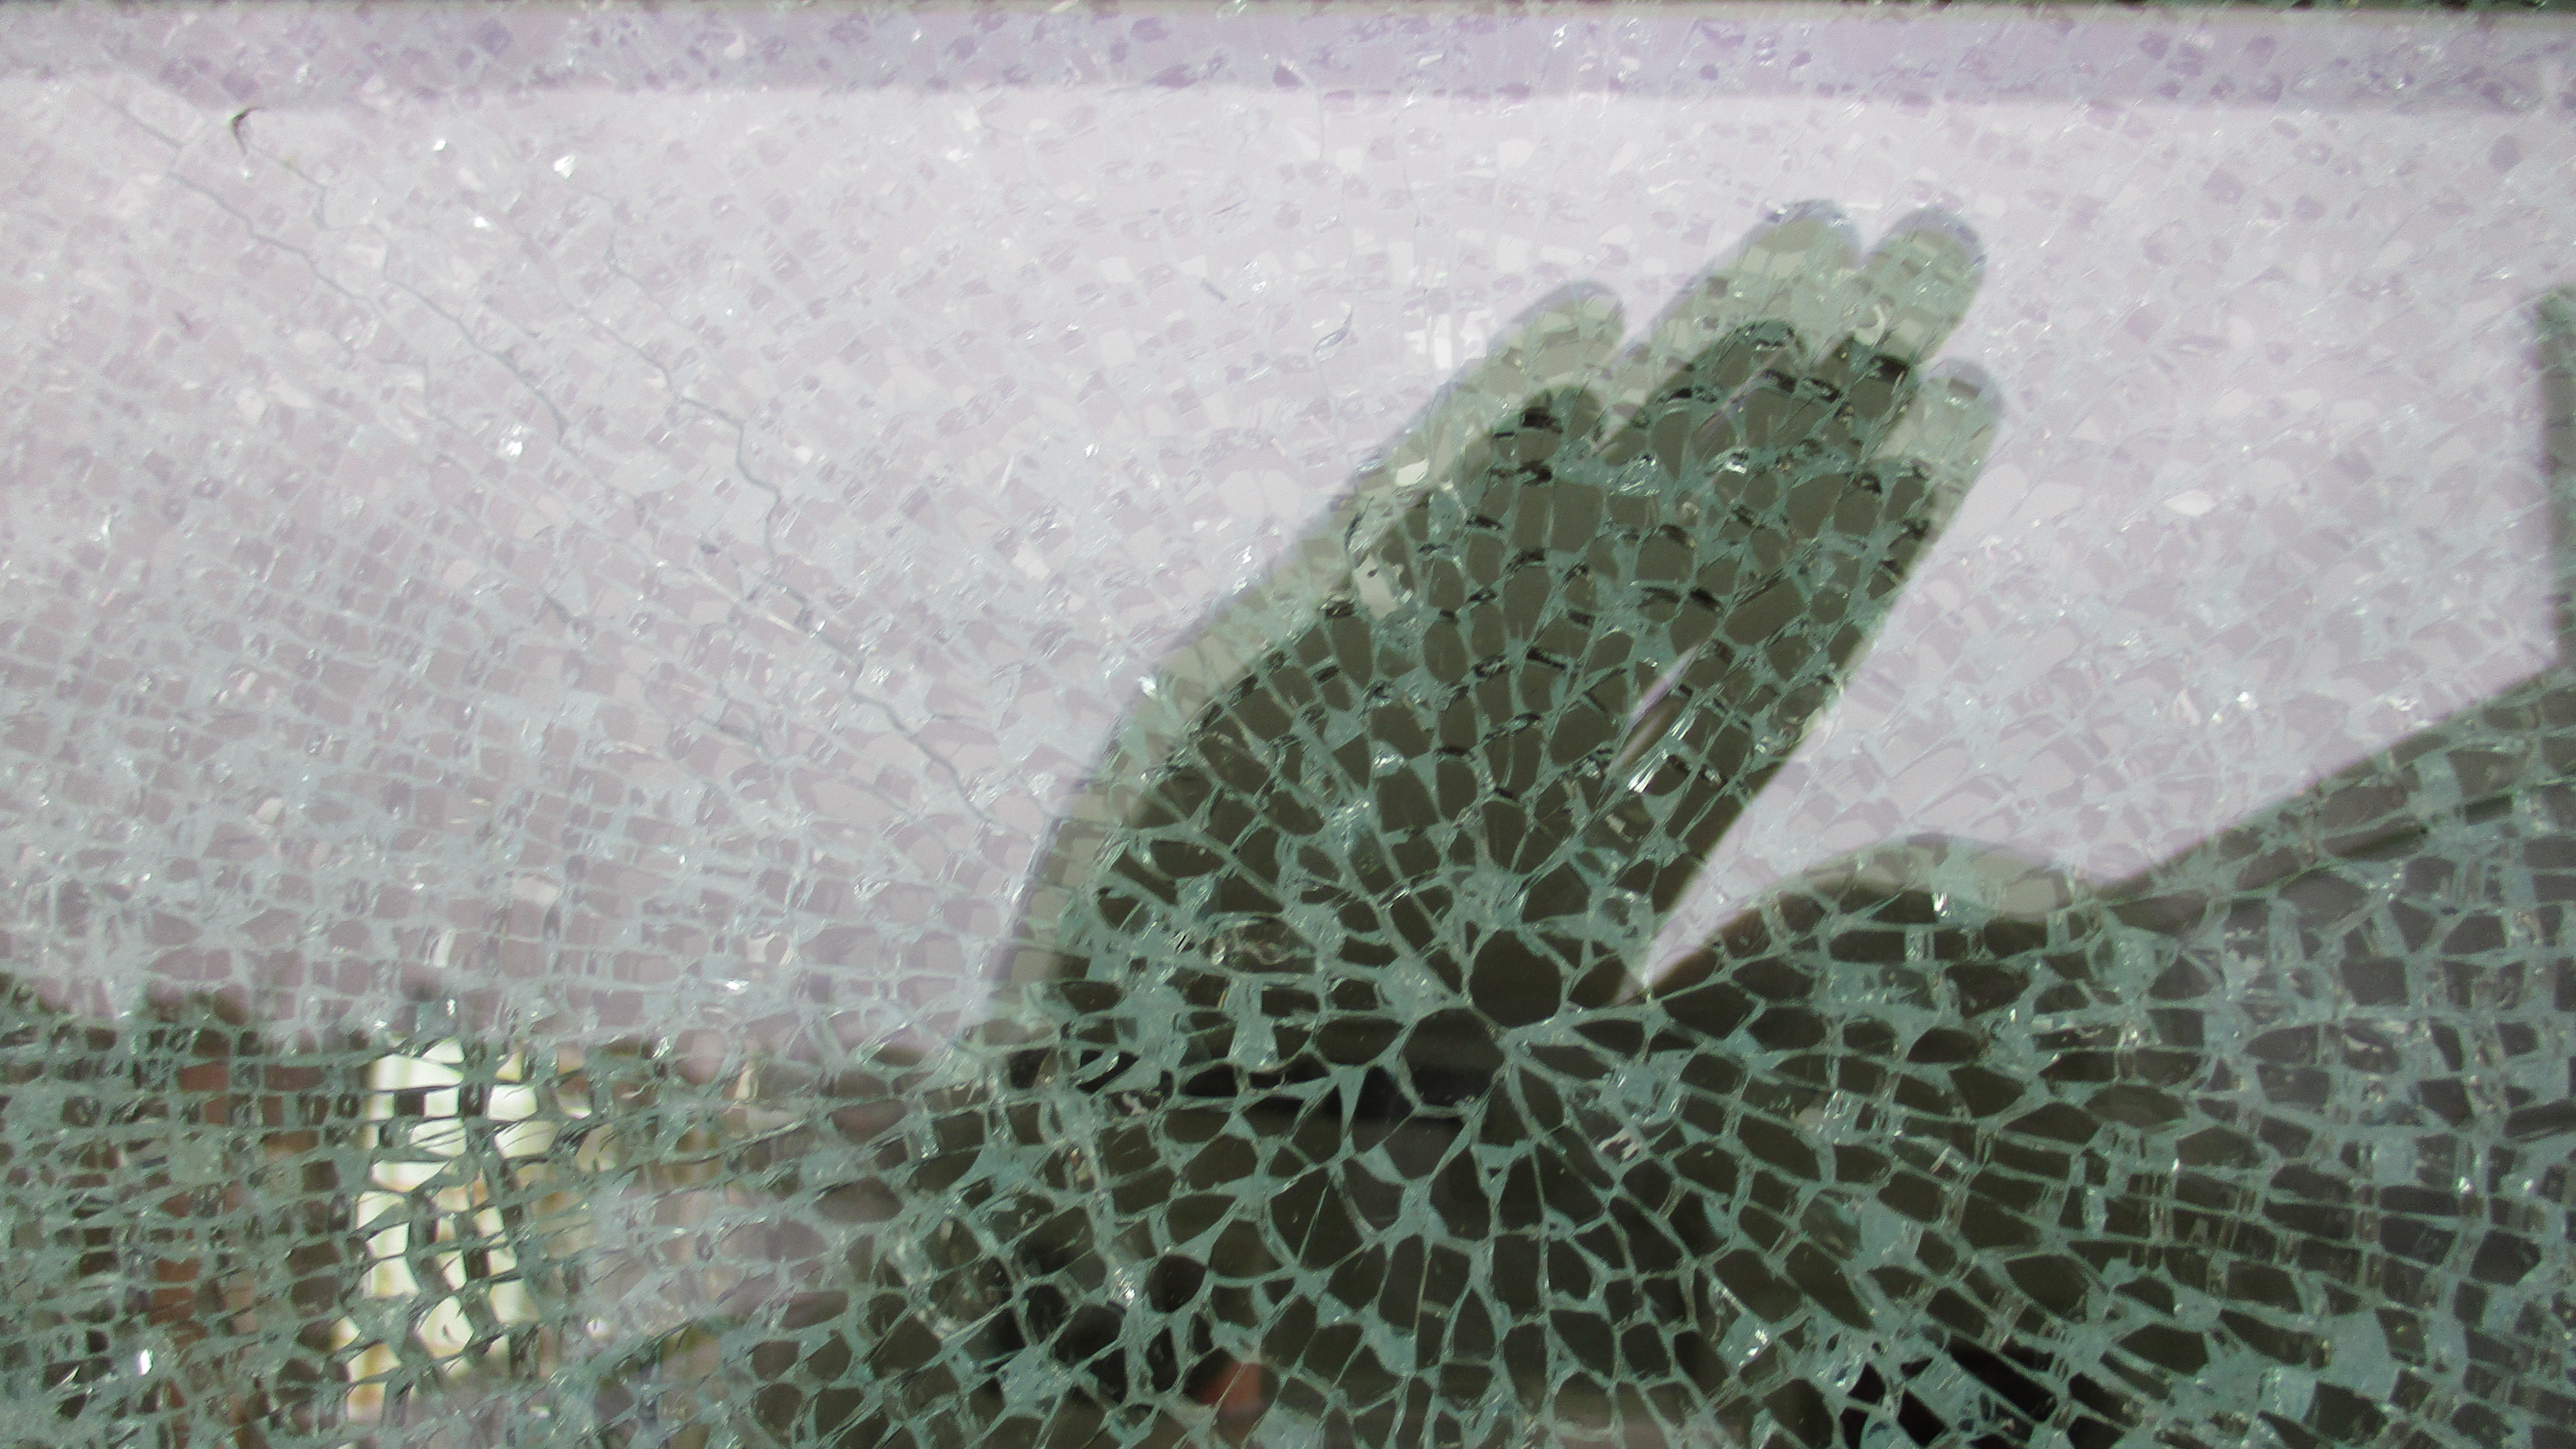 Toughened glass fracture due to nickel sulphite inclusions